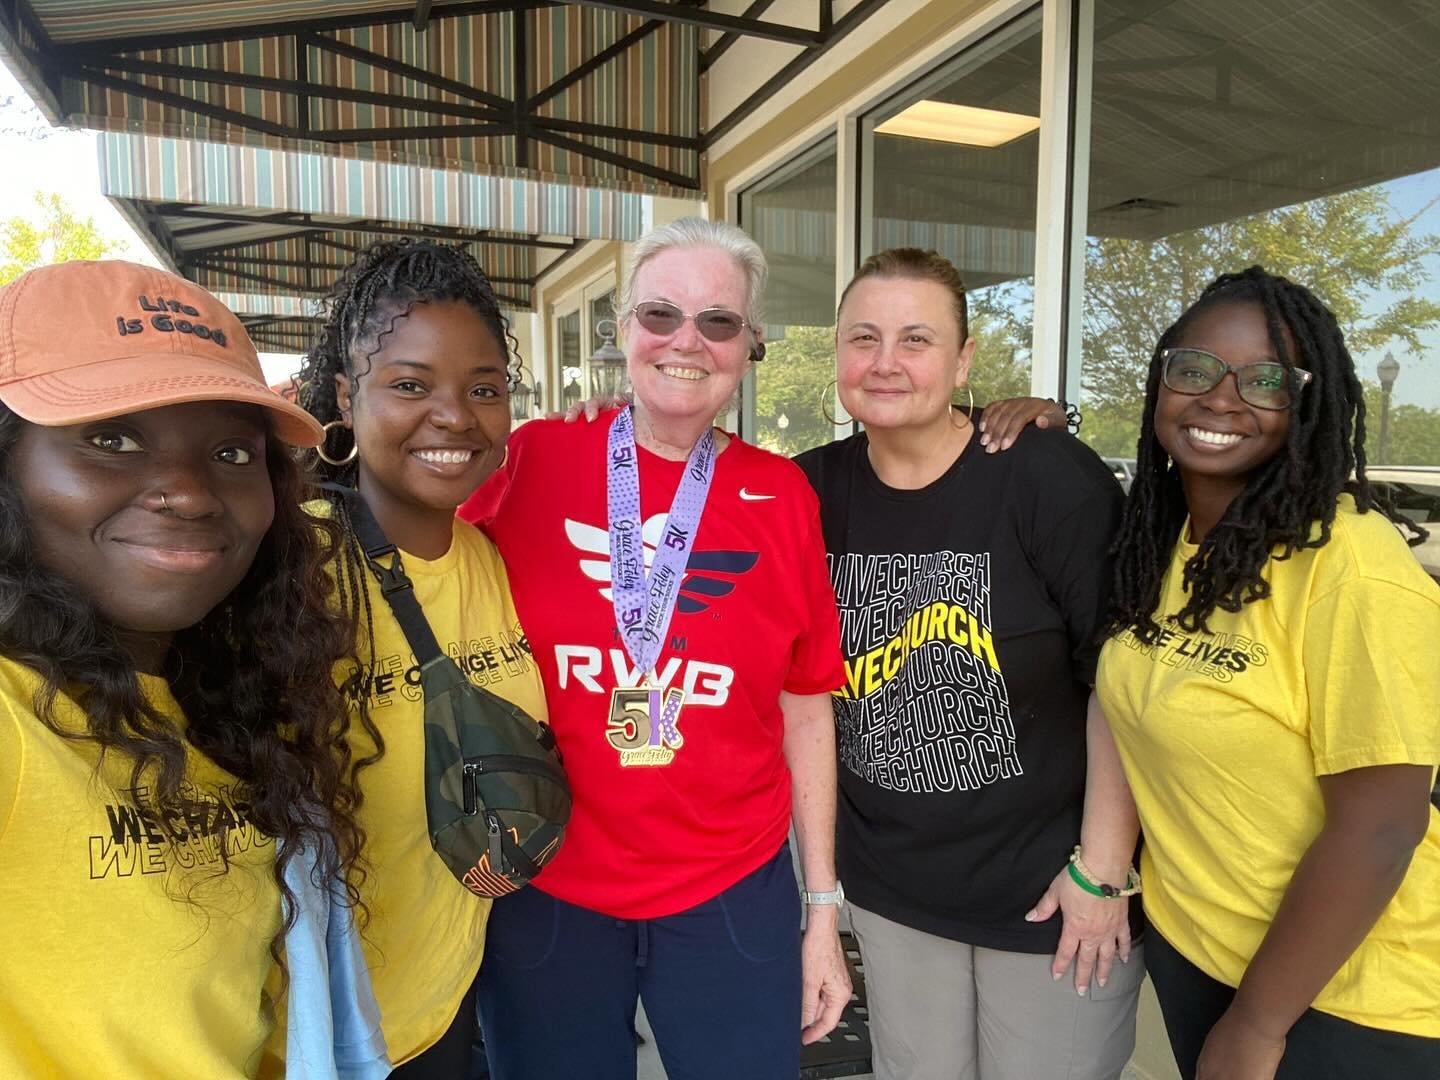 We had the pleasure of sending a team to serve at the Avalon Park 5K race to help with the race registration, pass out medals, and hand out waters. We loved serving our community in East Orlando!